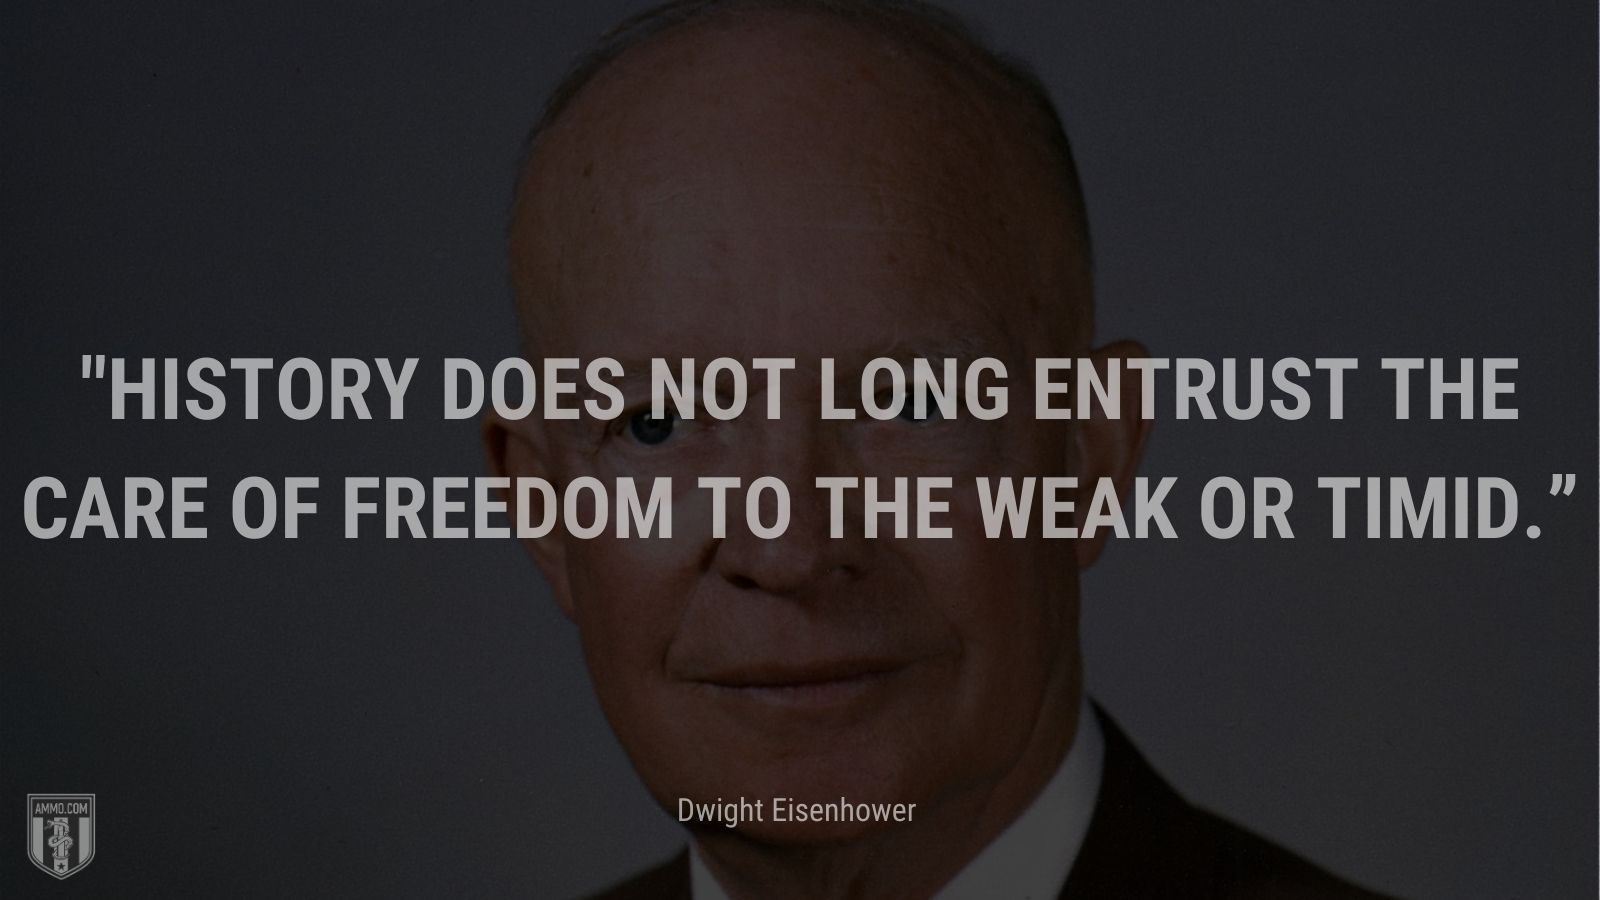 “History does not long entrust the care of freedom to the weak or timid.” - Dwight Eisenhower